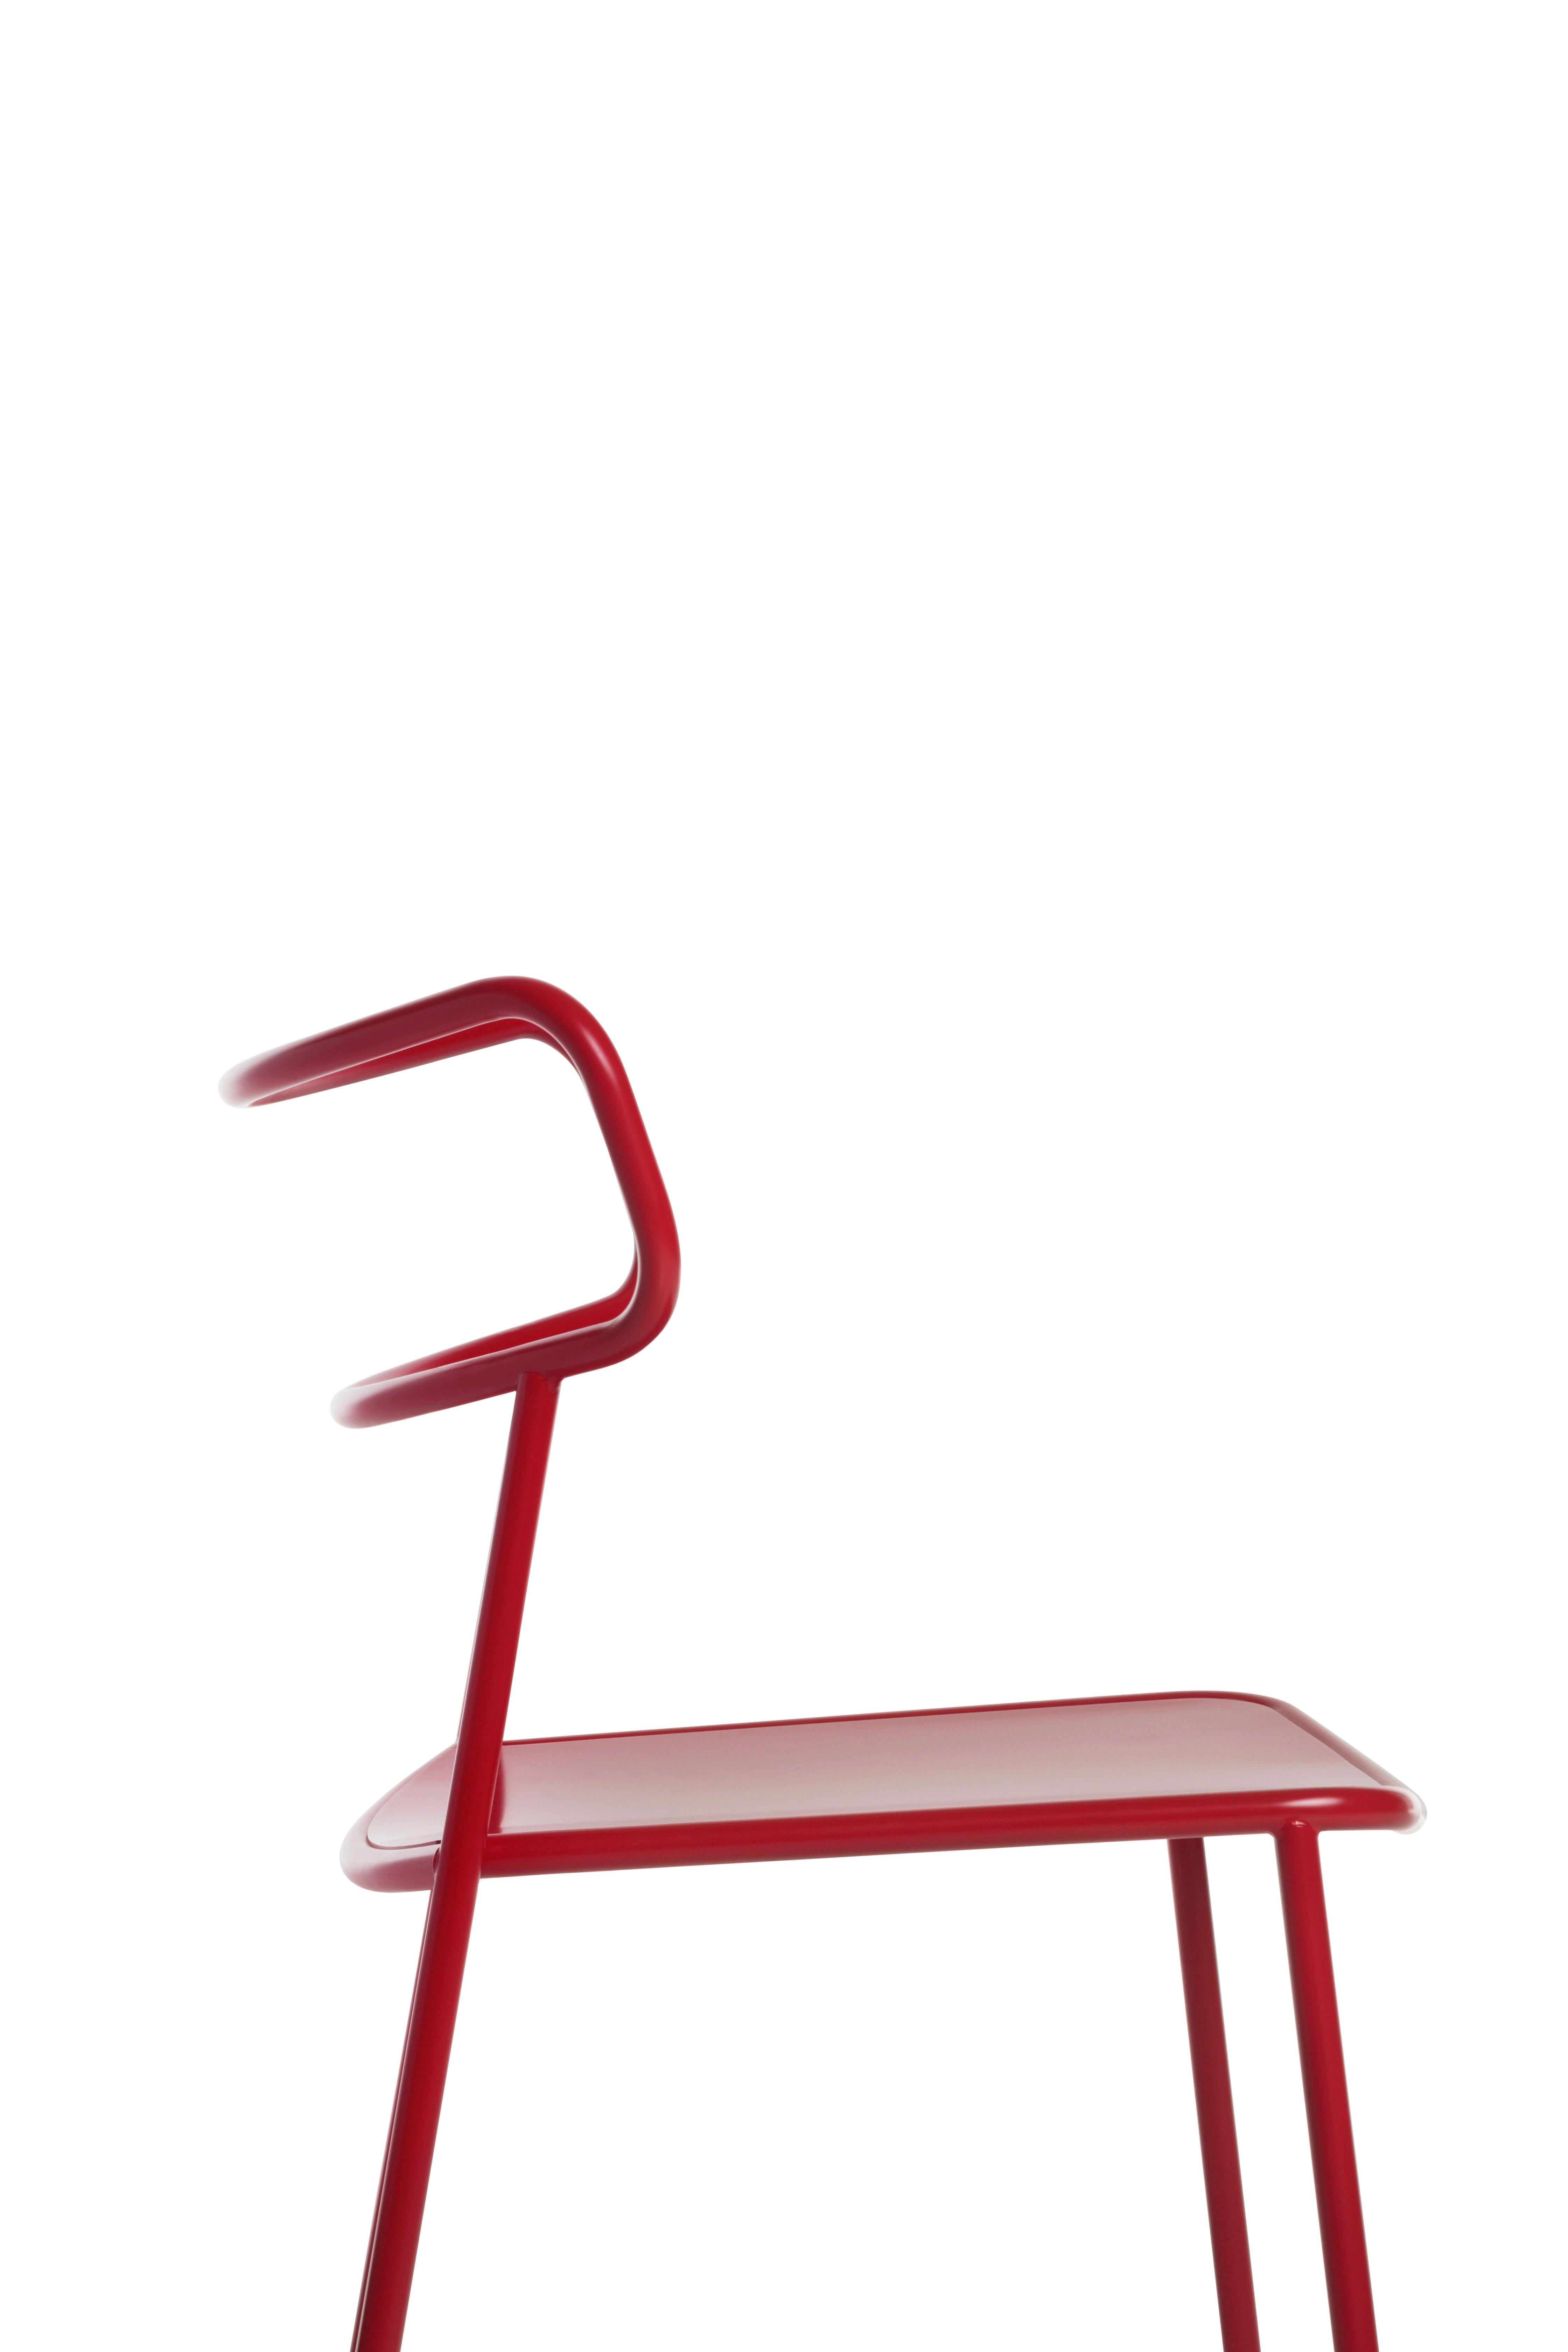 Paloma, both outdoors and indoors, translates the gestural sketch of the pencil into a three-dimensional object, capturing on the paper the essence of a chair through a minimalistic and unencumbered approach. Due to its immediate profound emotional